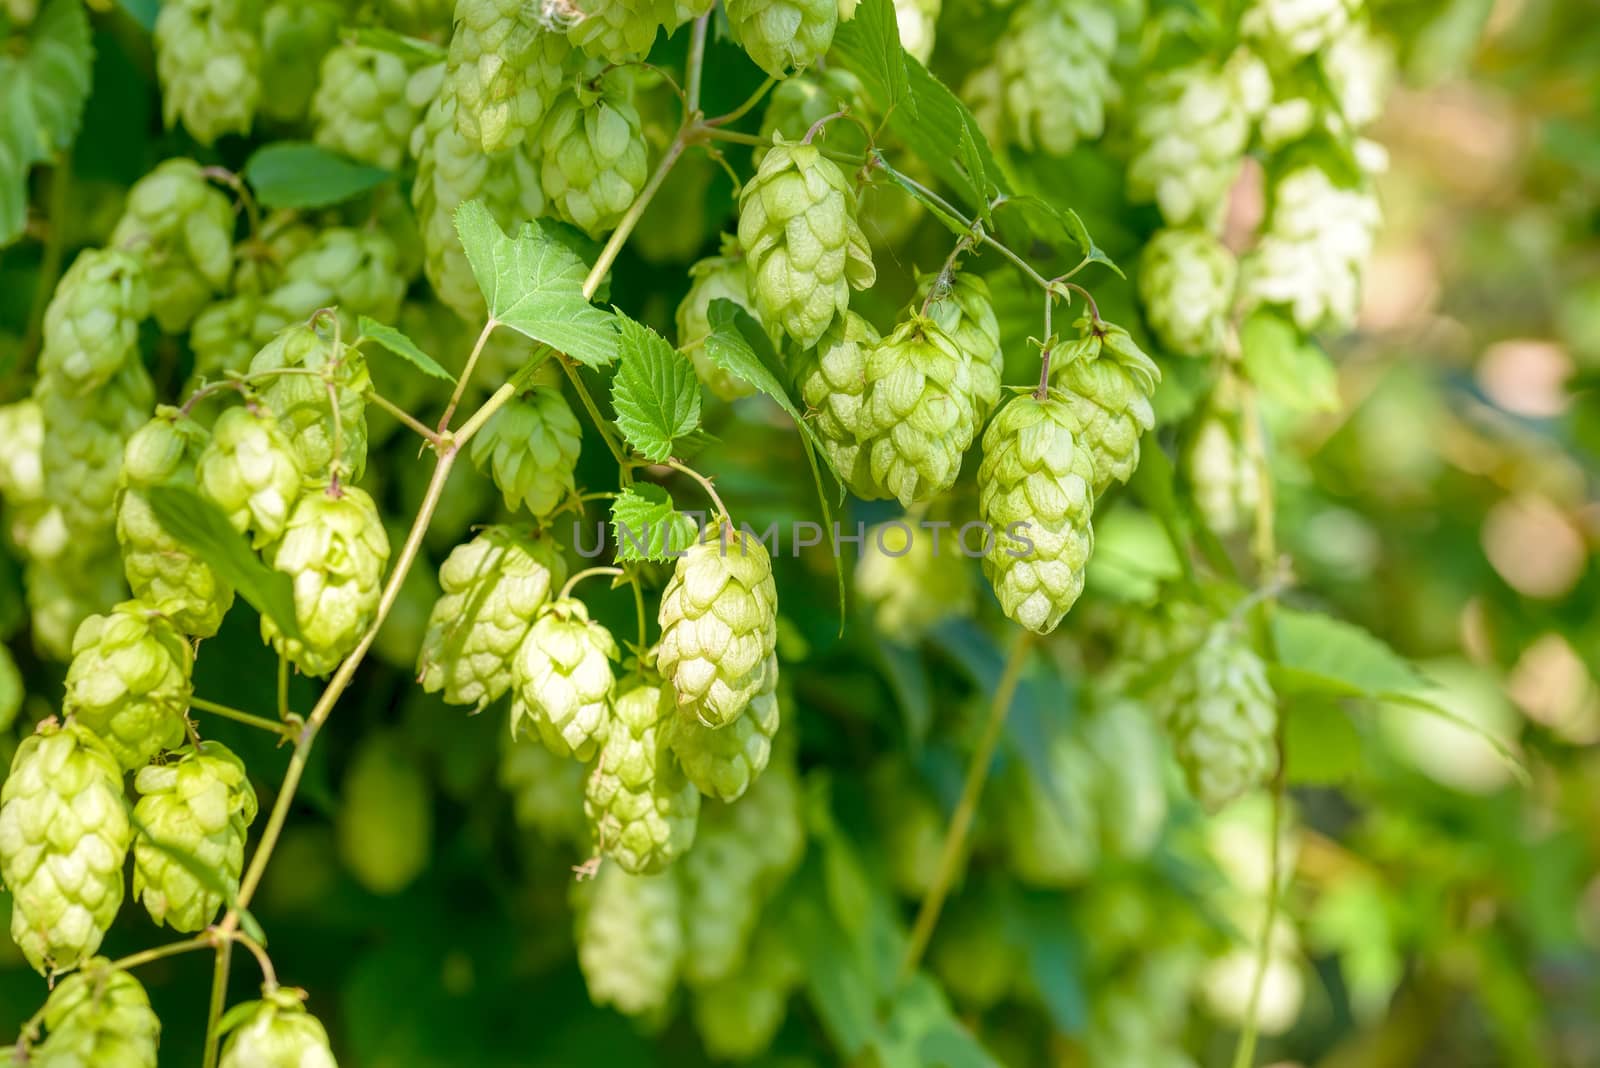 Humulus Lupulus Flowers, Also Called Hops by MaxalTamor